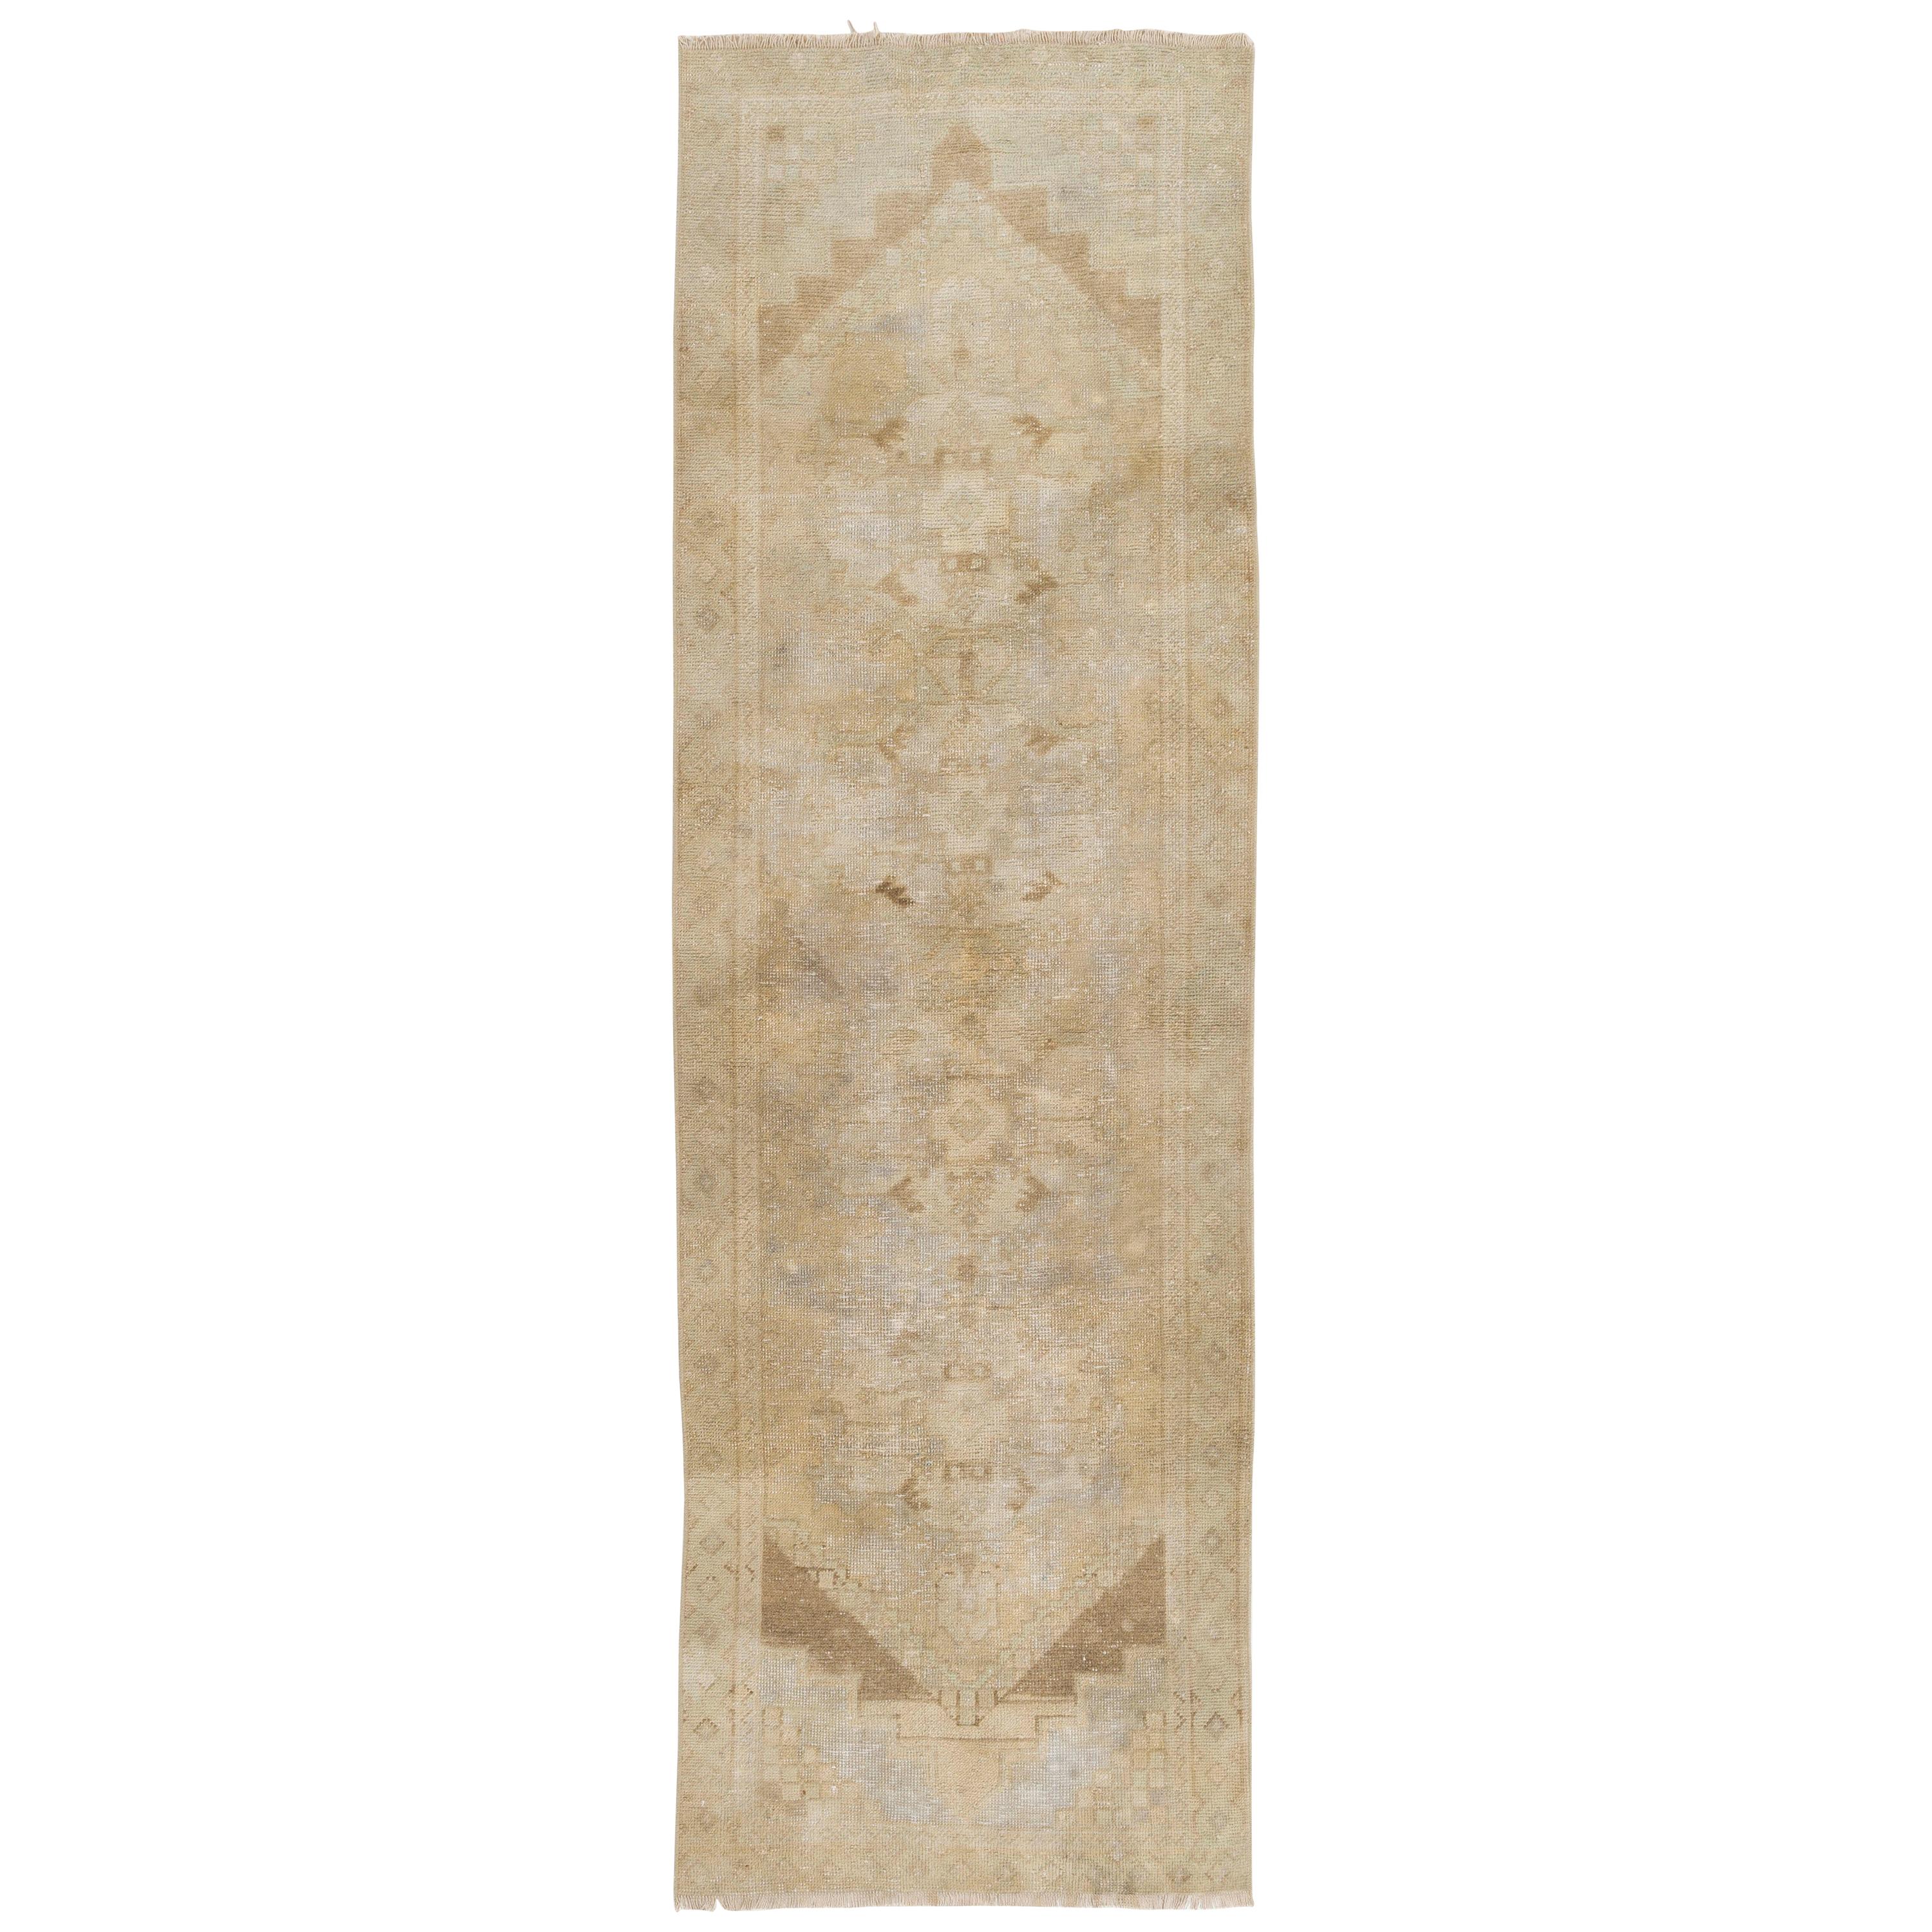 3x8.8 Ft - Antique Turkish Oushak Runner in Neutral Colors. Handknotted Wool Rug